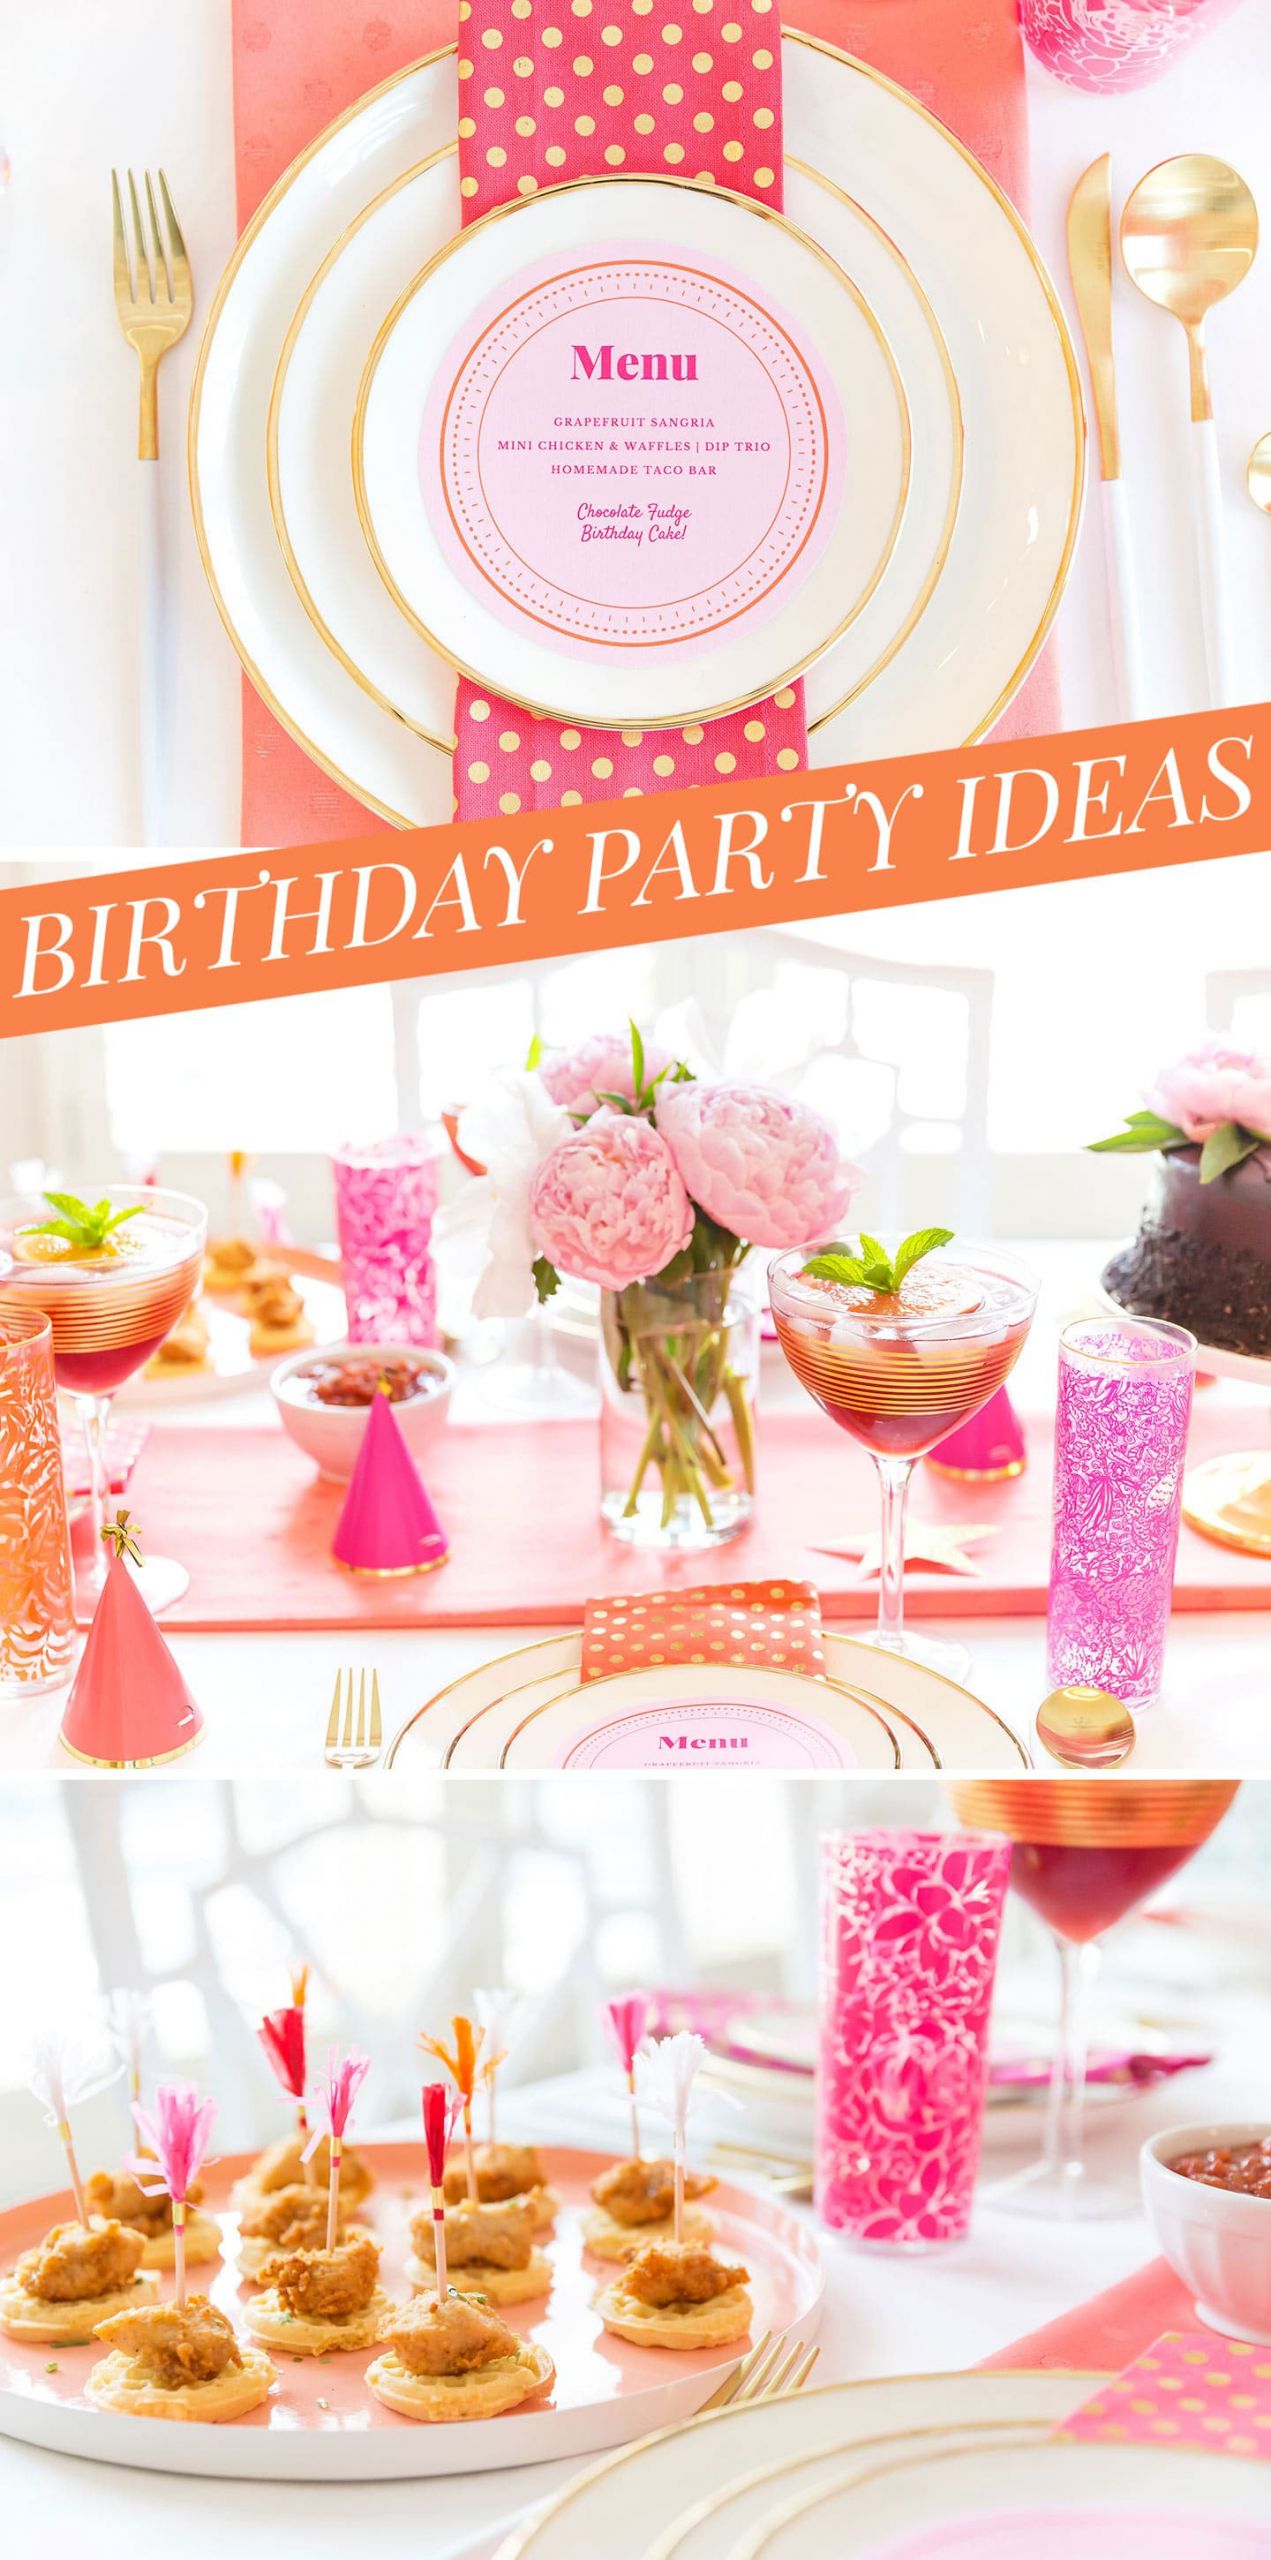 Birthday Party Decorations For Adults
 Creative Adult Birthday Party Ideas for the Girls